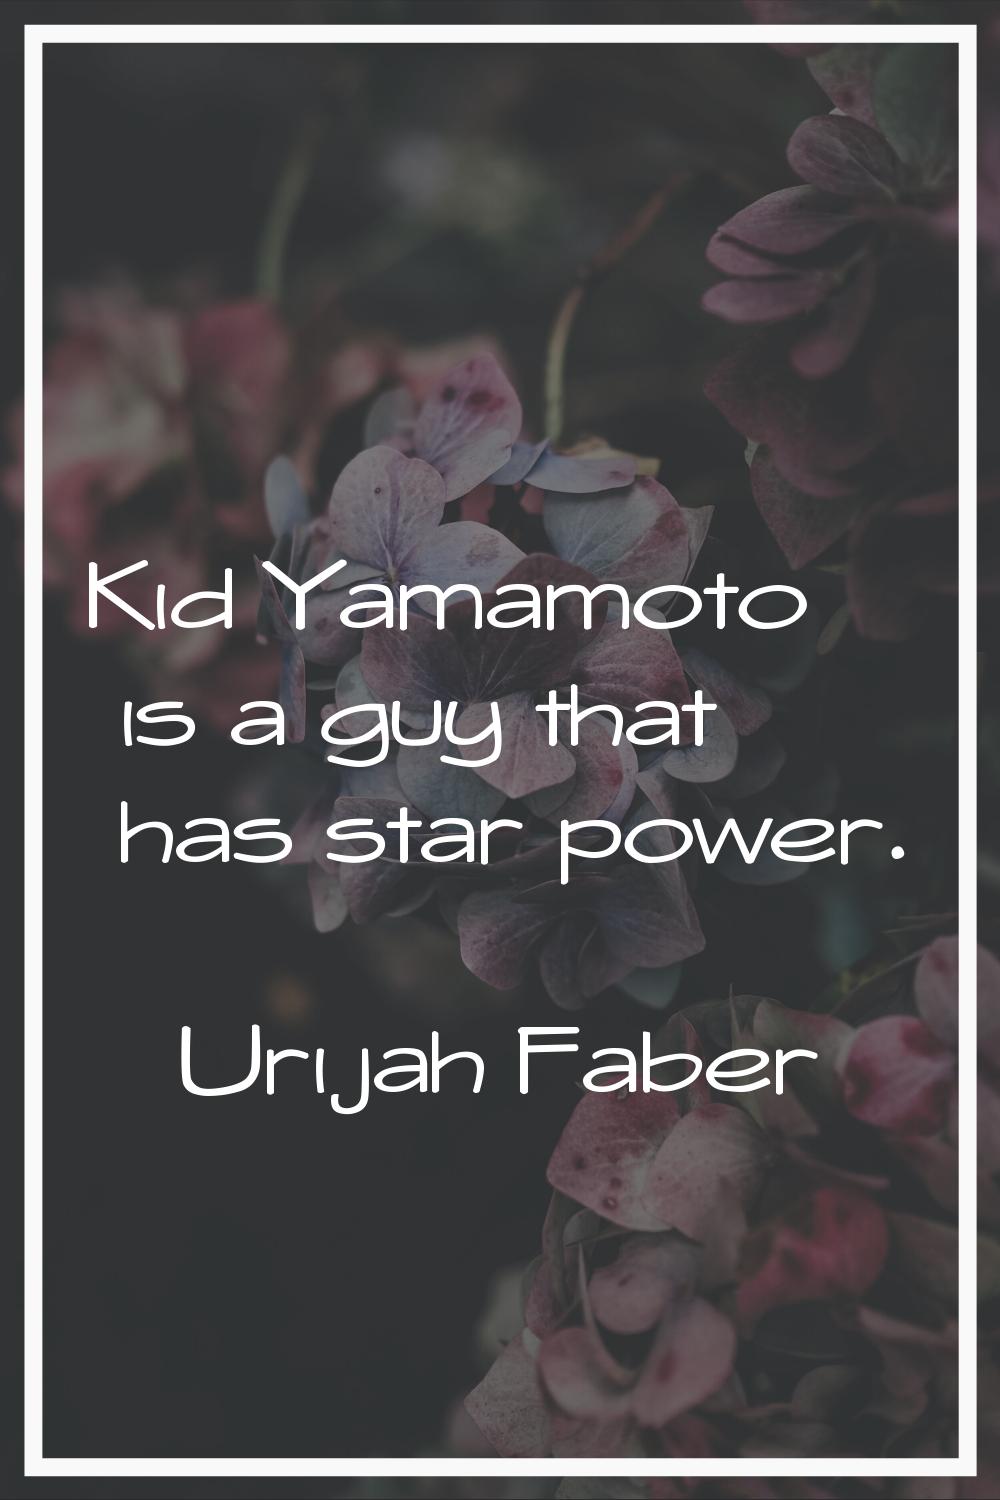 Kid Yamamoto is a guy that has star power.